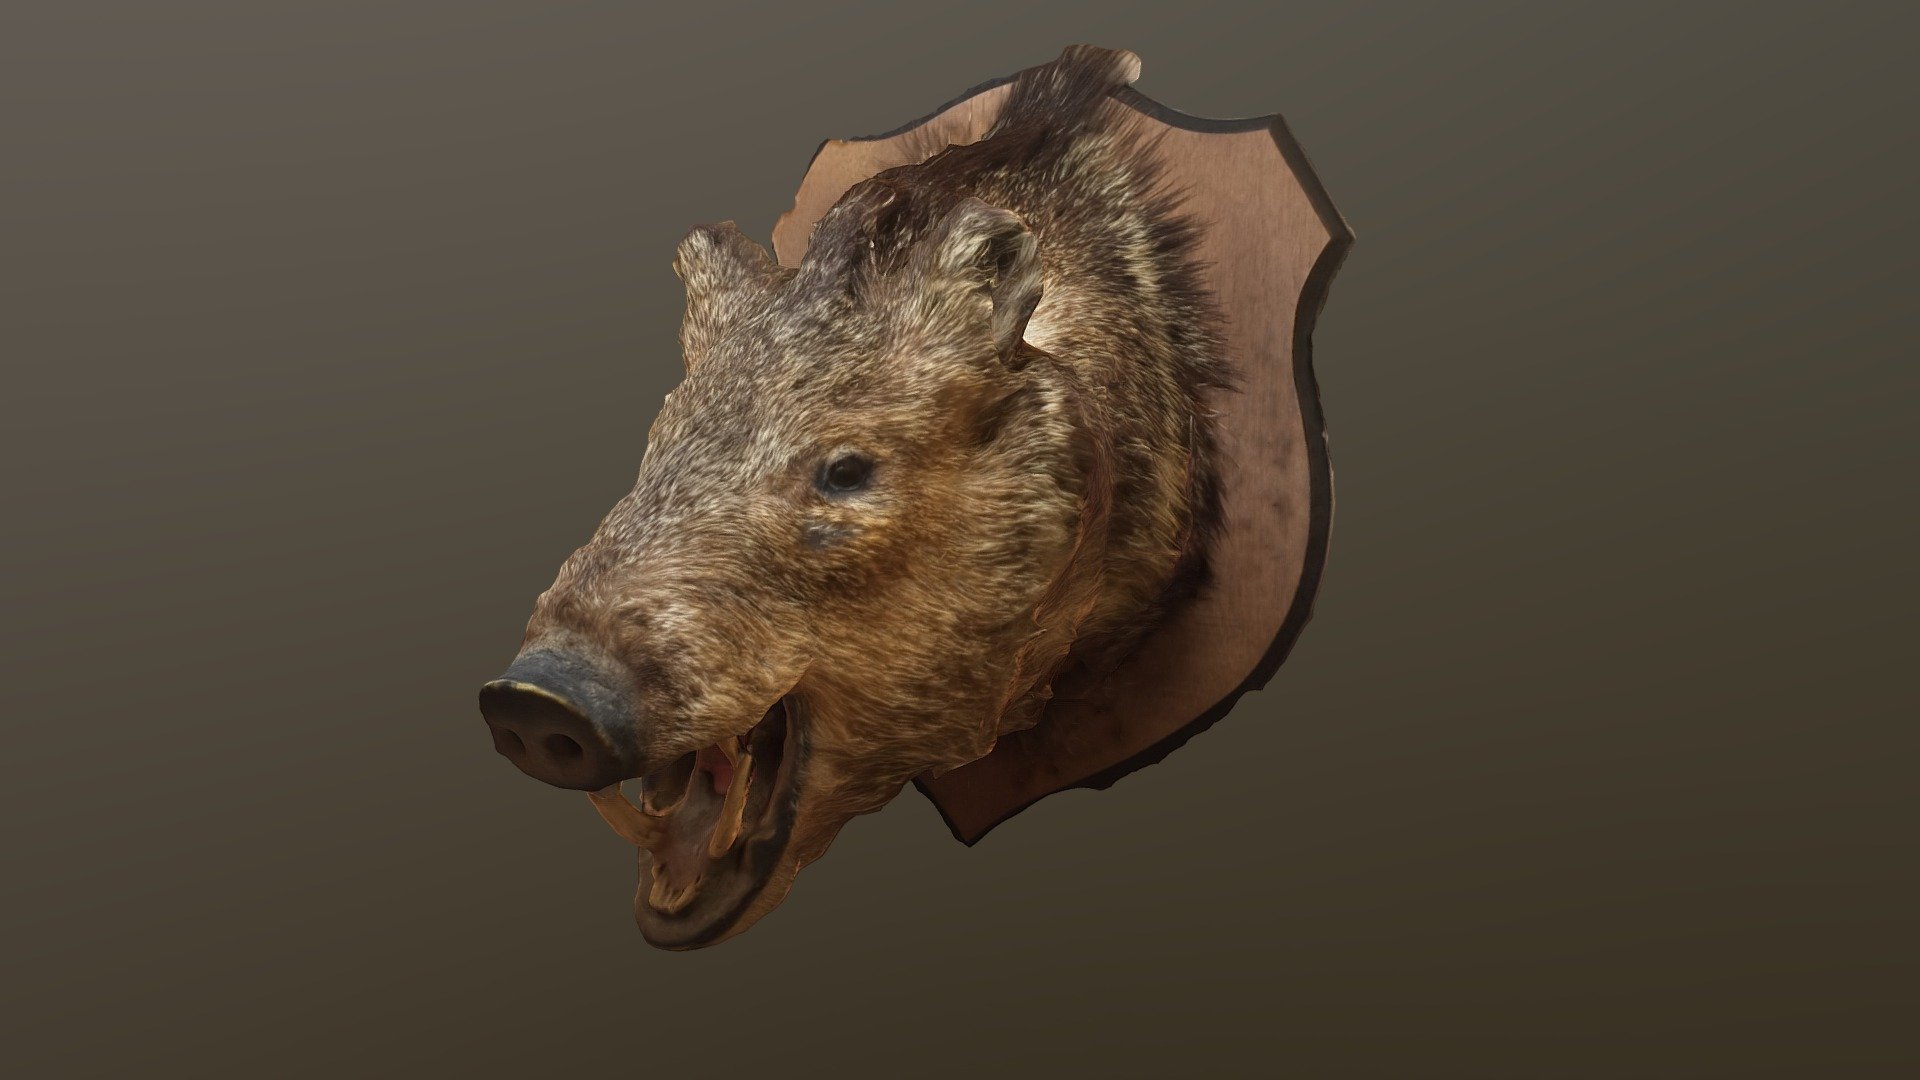 Scan taken at the natural science museum in houston. Taxidermy boar head. 
check out the other scans on my page. thanks!
by austin beaulier - Boar Head photogrammetry - Download Free 3D model by Austin Beaulier (@Austin.Beaulier) 3d model